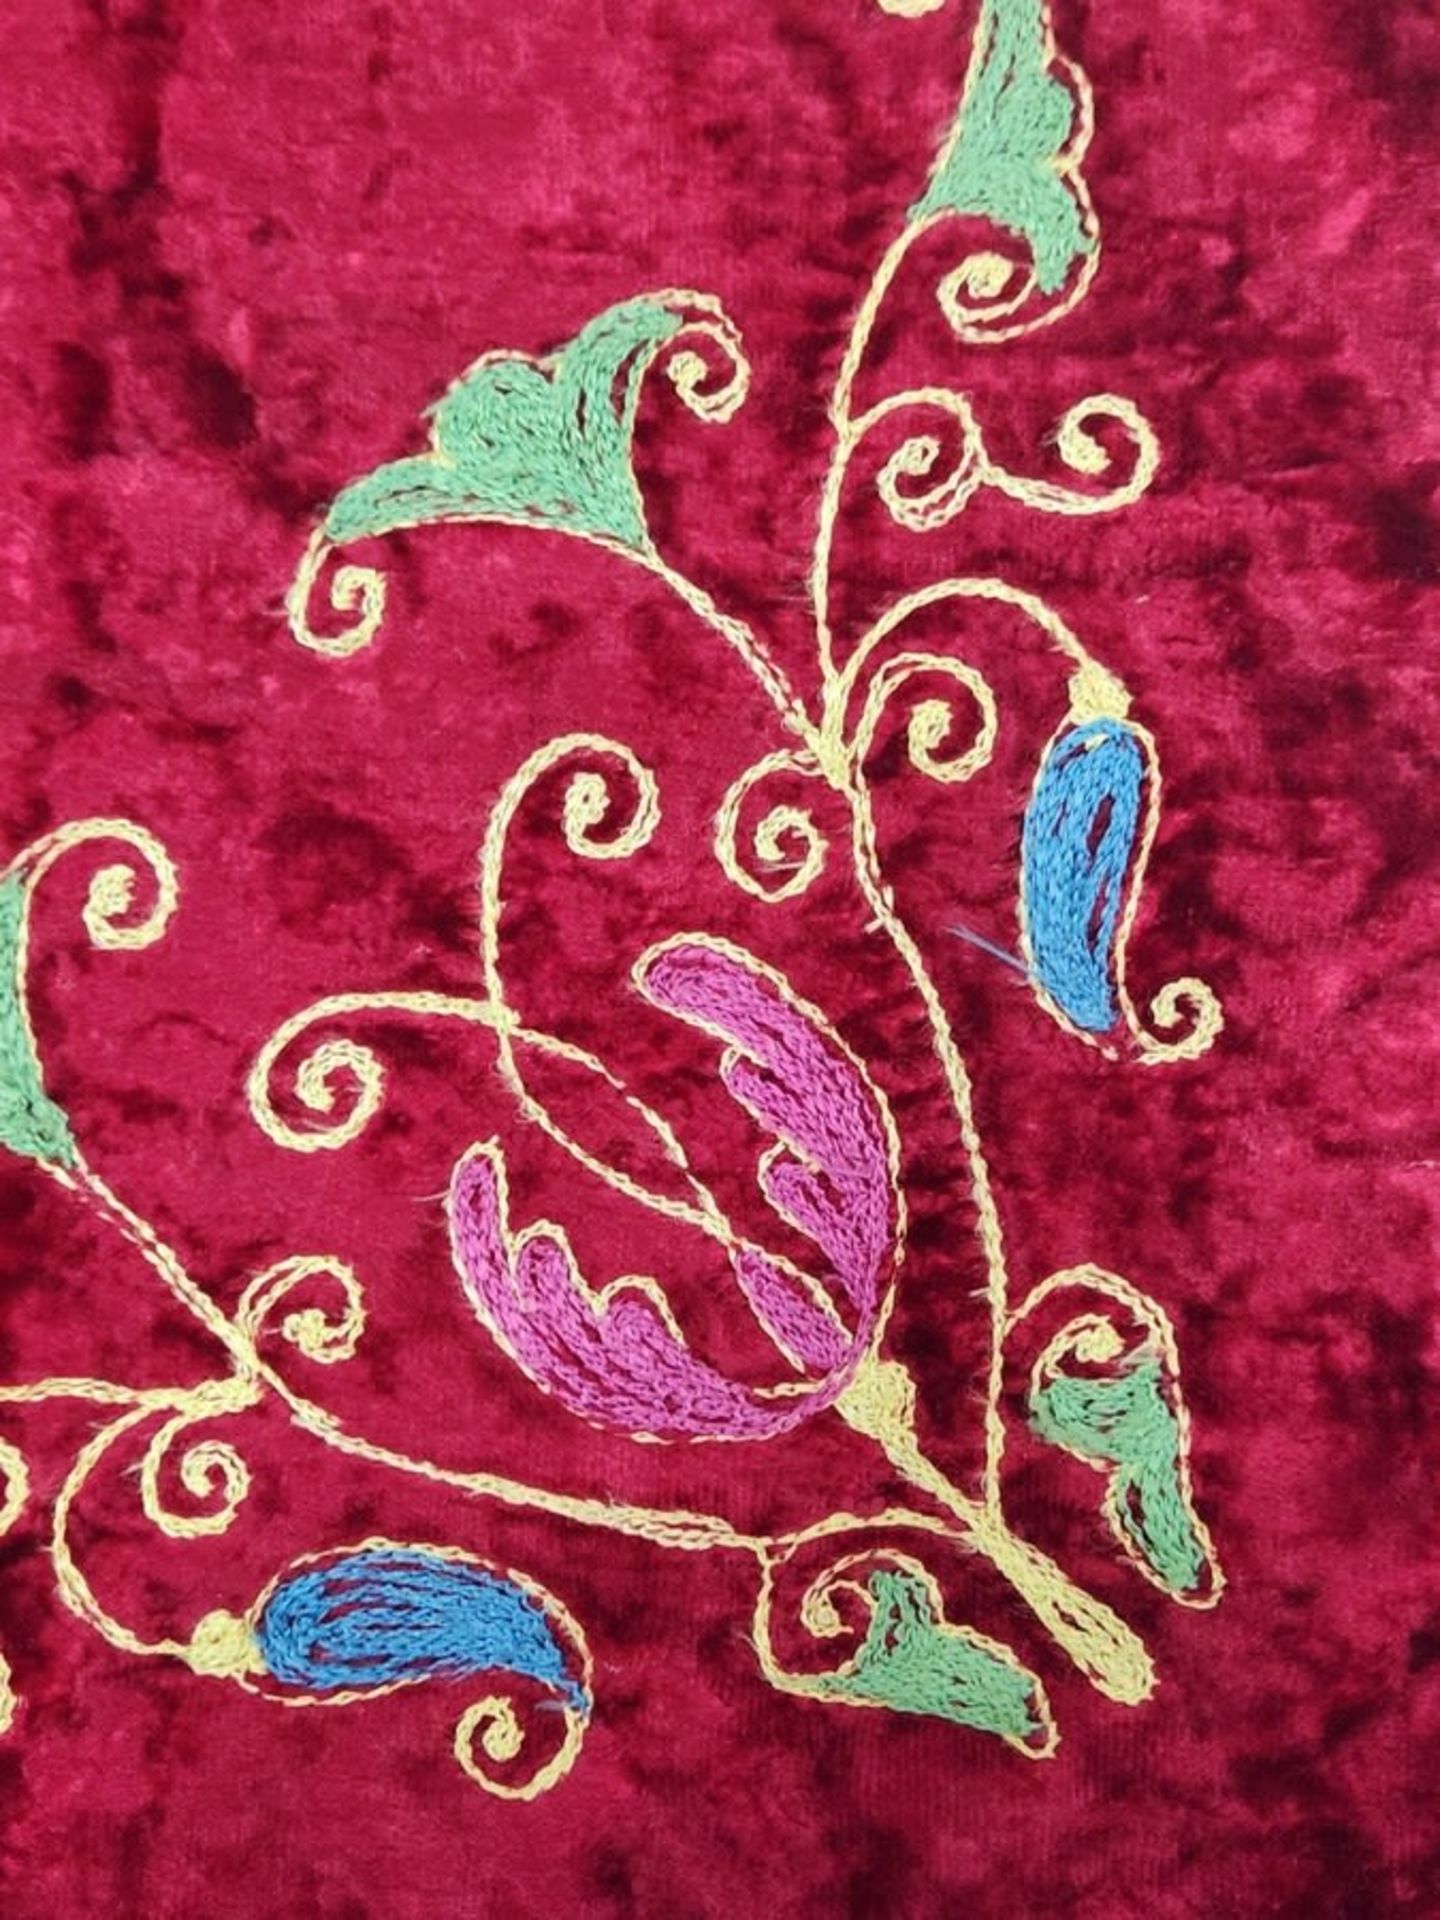 A Torah scroll coat, decorated with cotton thread weaving on red velvet and red fabric strands, - Image 4 of 7